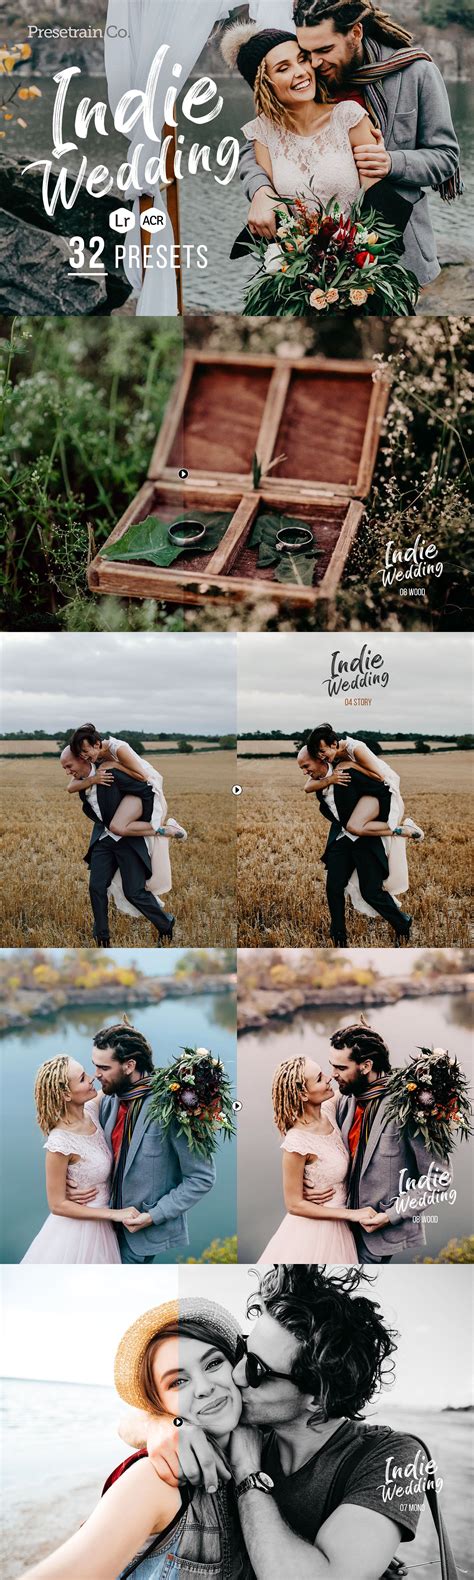 Indie wedding is a collection of natural author presets for wedding and portrait photography. Indie Wedding Presets - LR-PS-Mobile | Wedding presets ...